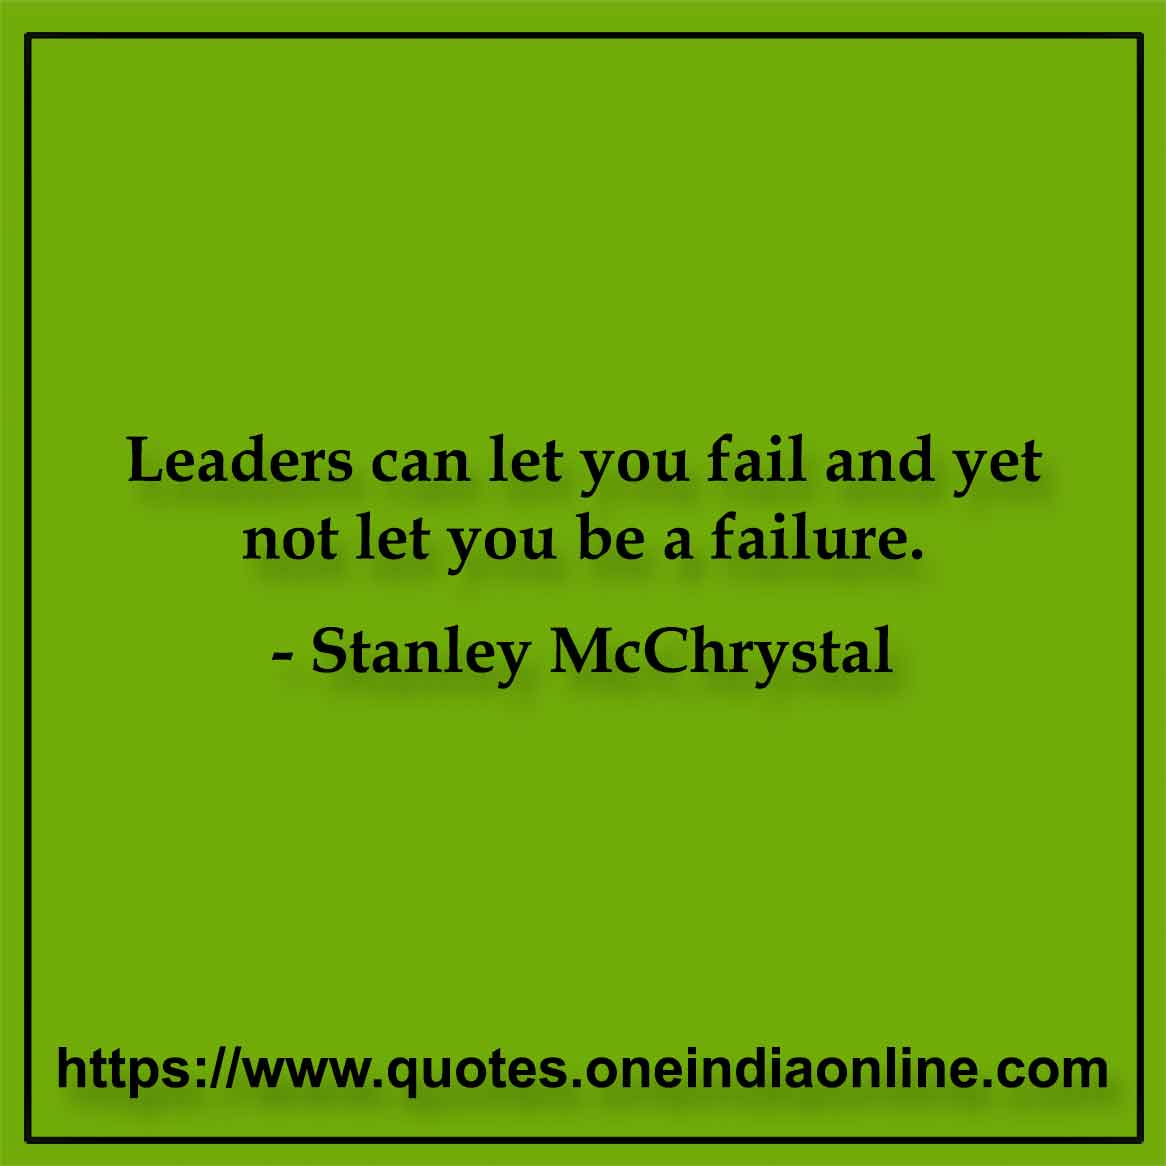 Leaders can let you fail and yet not let you be a failure.

- Stanley McChrystal